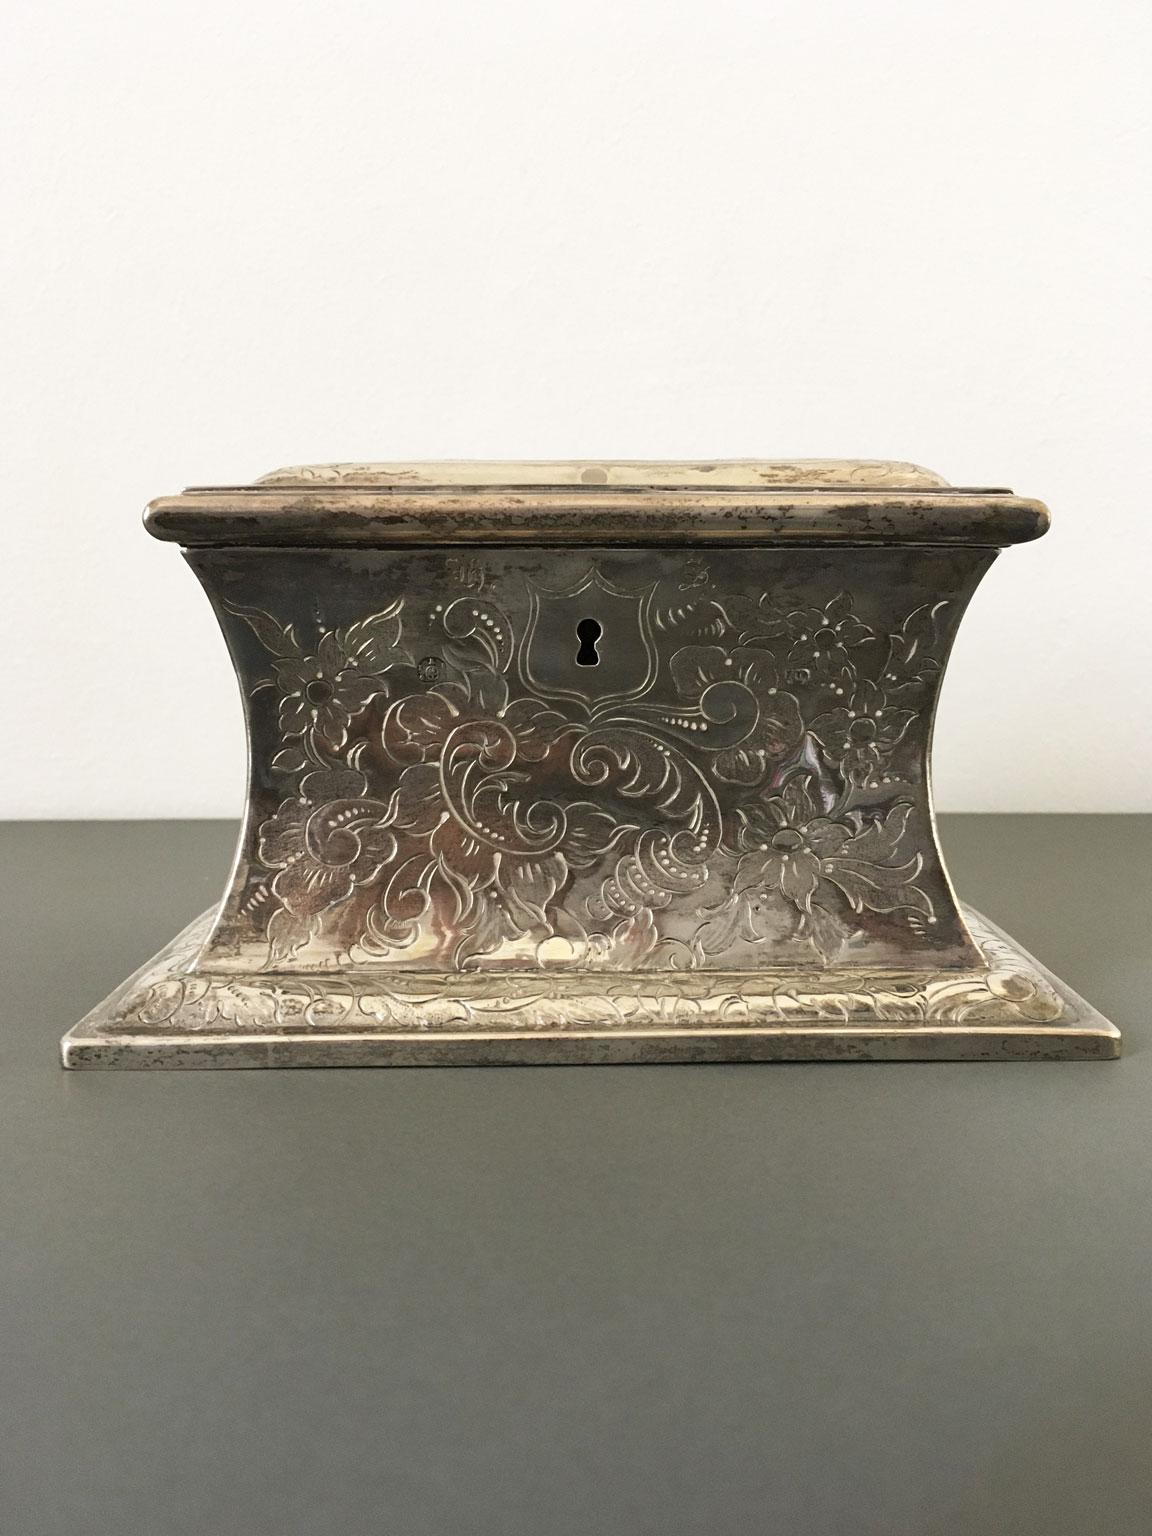 Mid-18th Century German Engraved Sterking Silver Box For Sale 12